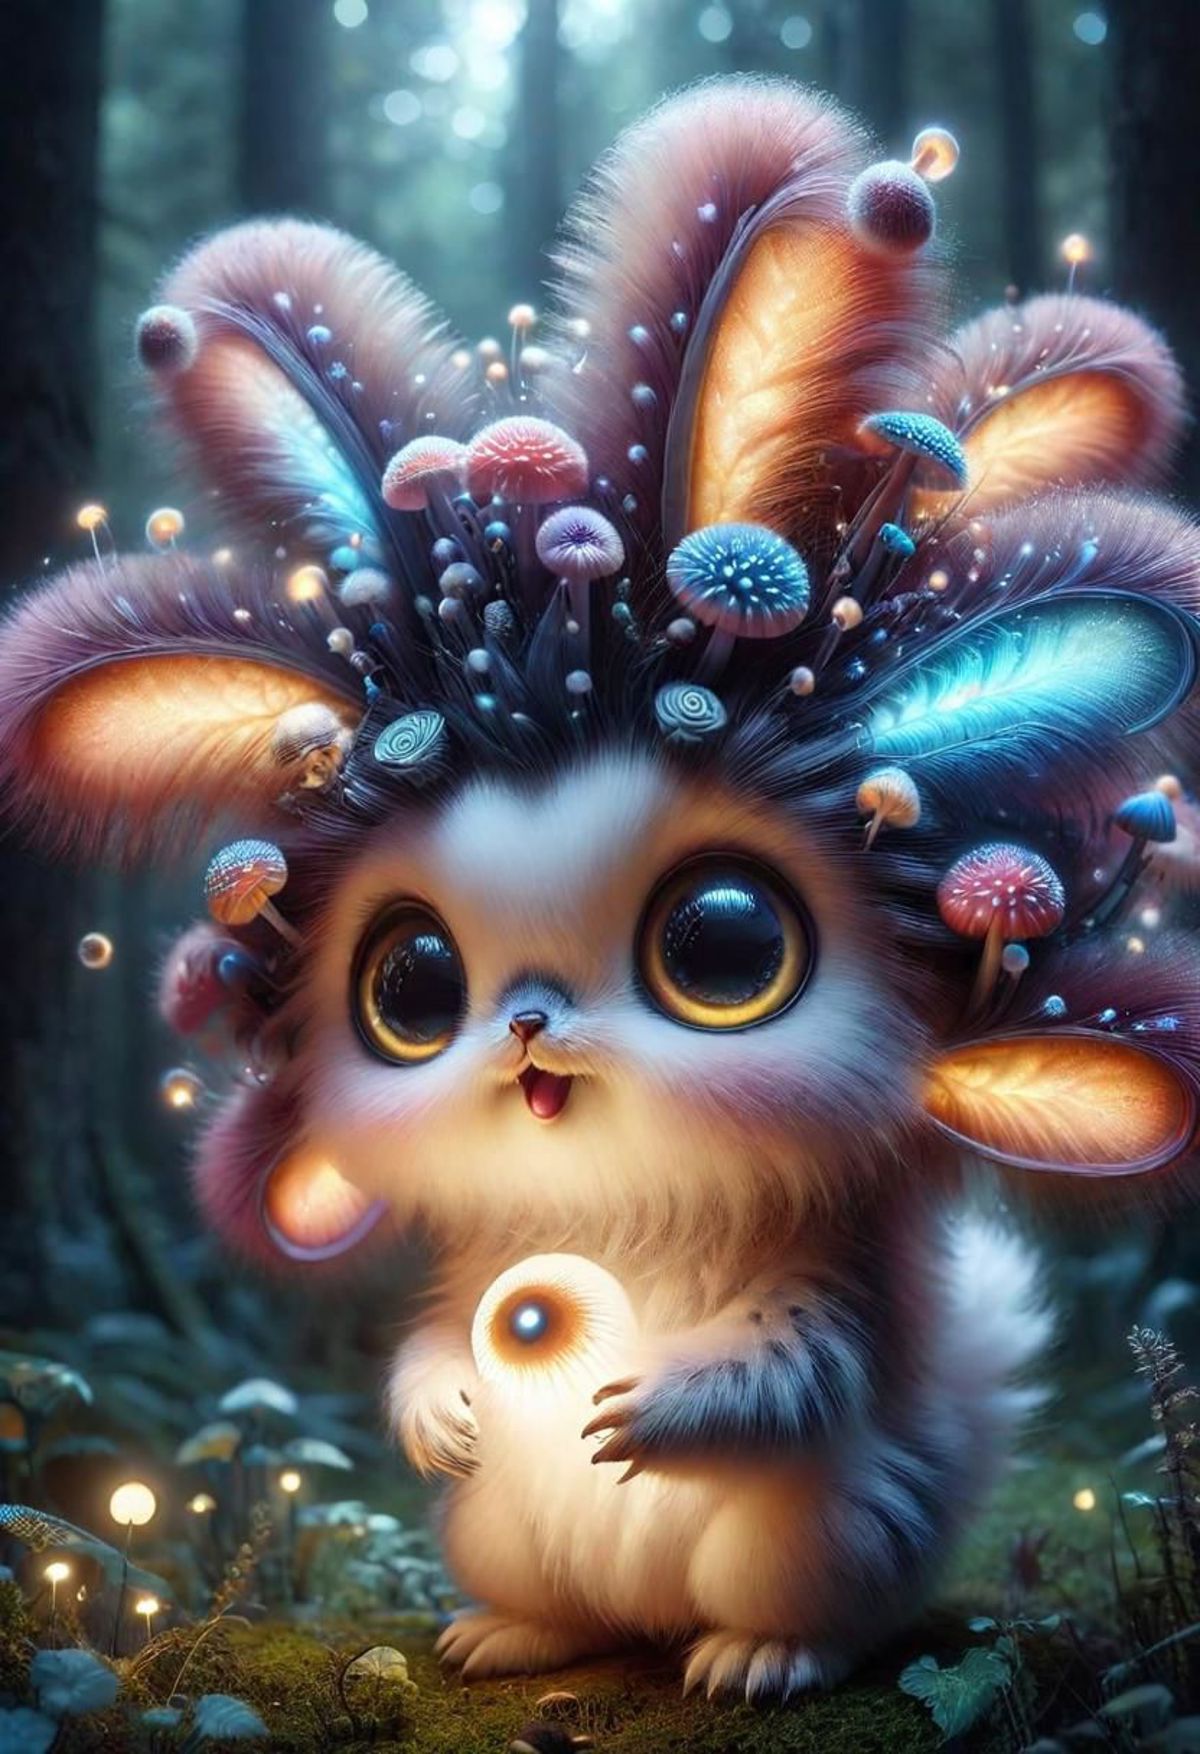 A cute, furry creature with a mushroom on its head, holding a glowing light bulb in its paws.